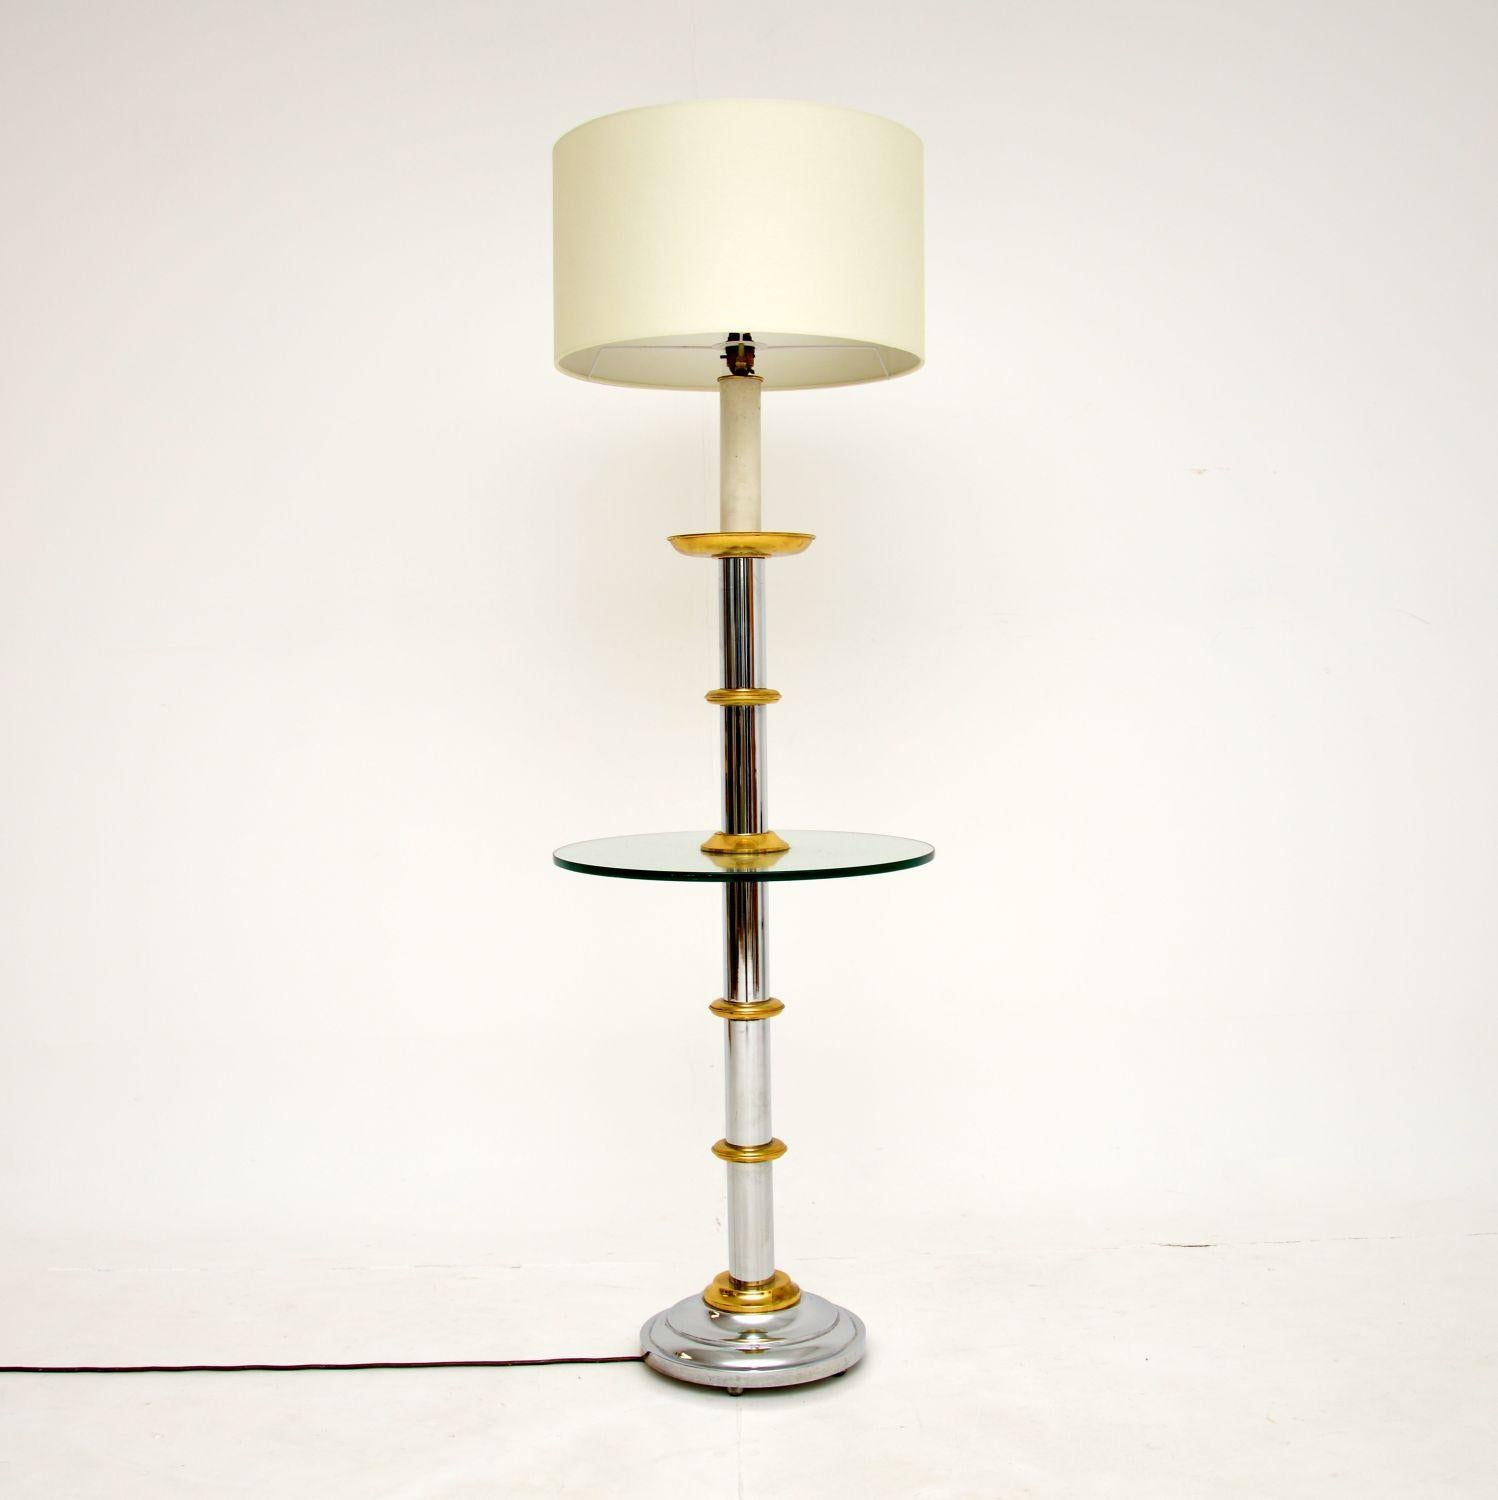 An excellent vintage floor lamp in chrome and brass, with a circular glass table built in. This was made in England, it dates from around the 1970-1980’s.

It is of fantastic quality, the glass is thick and toughened, the alternating chrome and